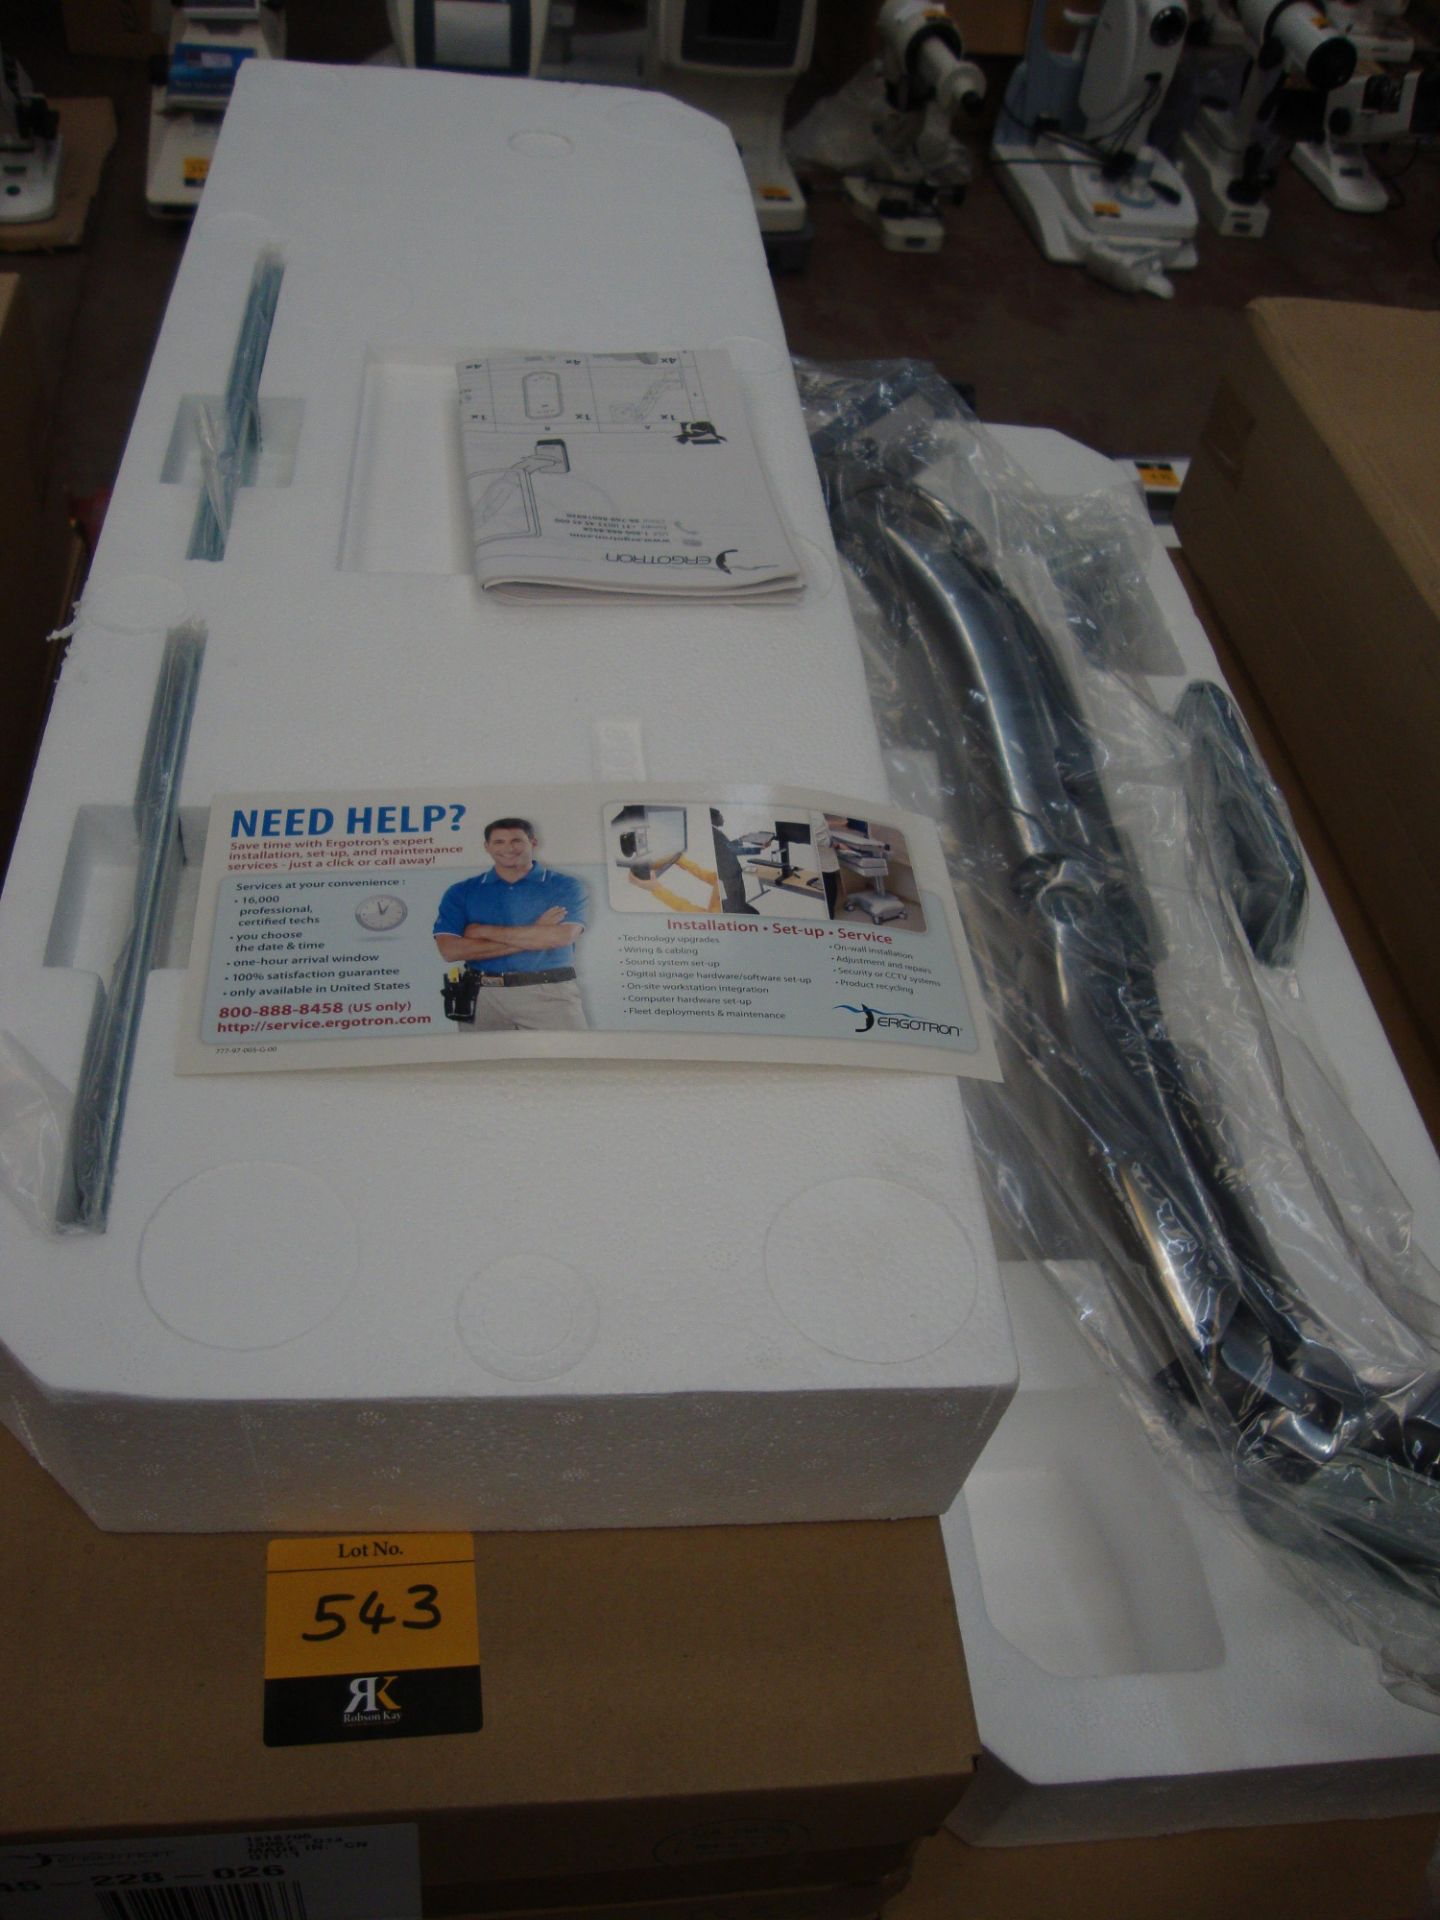 11 off high quality wall-mountable mitre brackets by Ergotron - these all appear boxed, new and